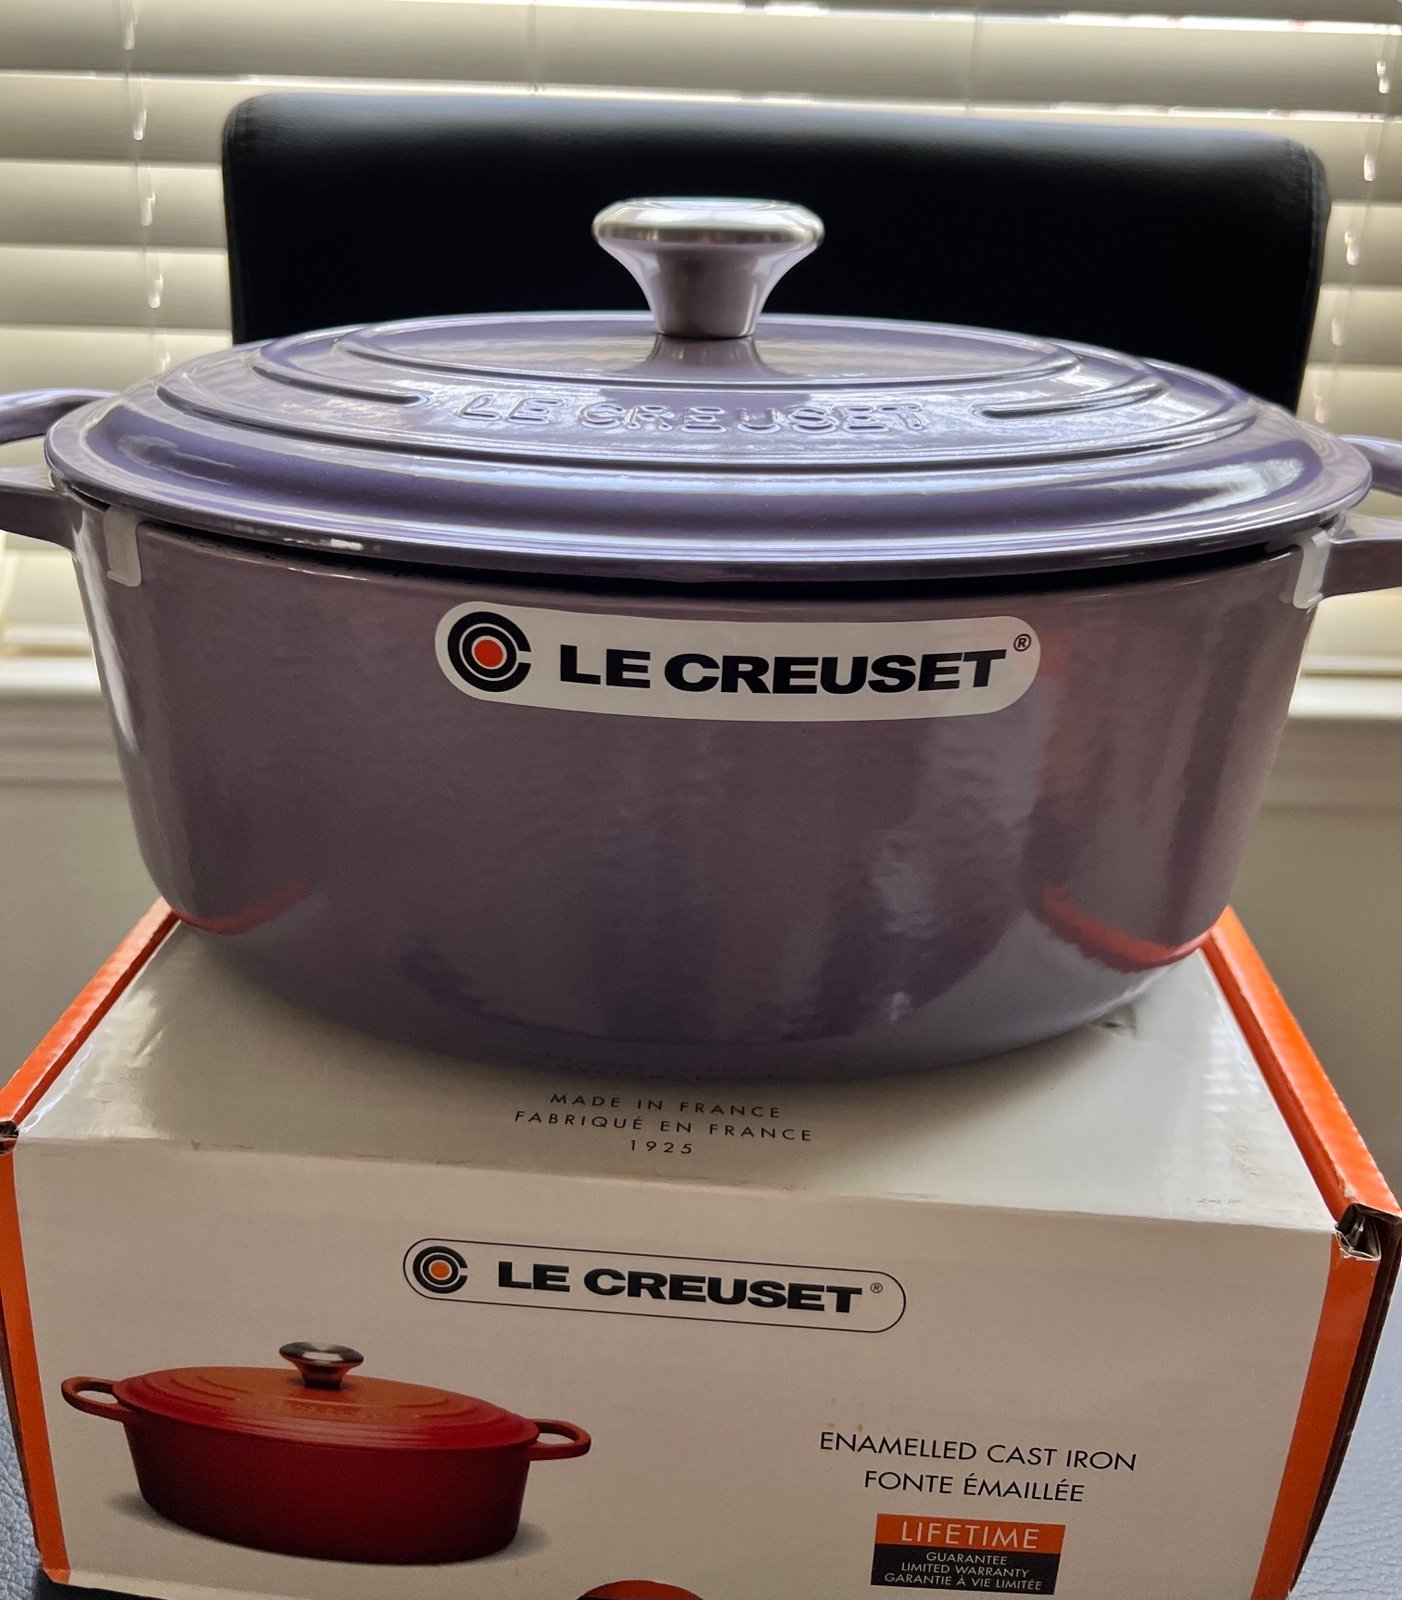 NWT in box Le Creuset RARE SOLD OUT purple Oval 6.75 qu